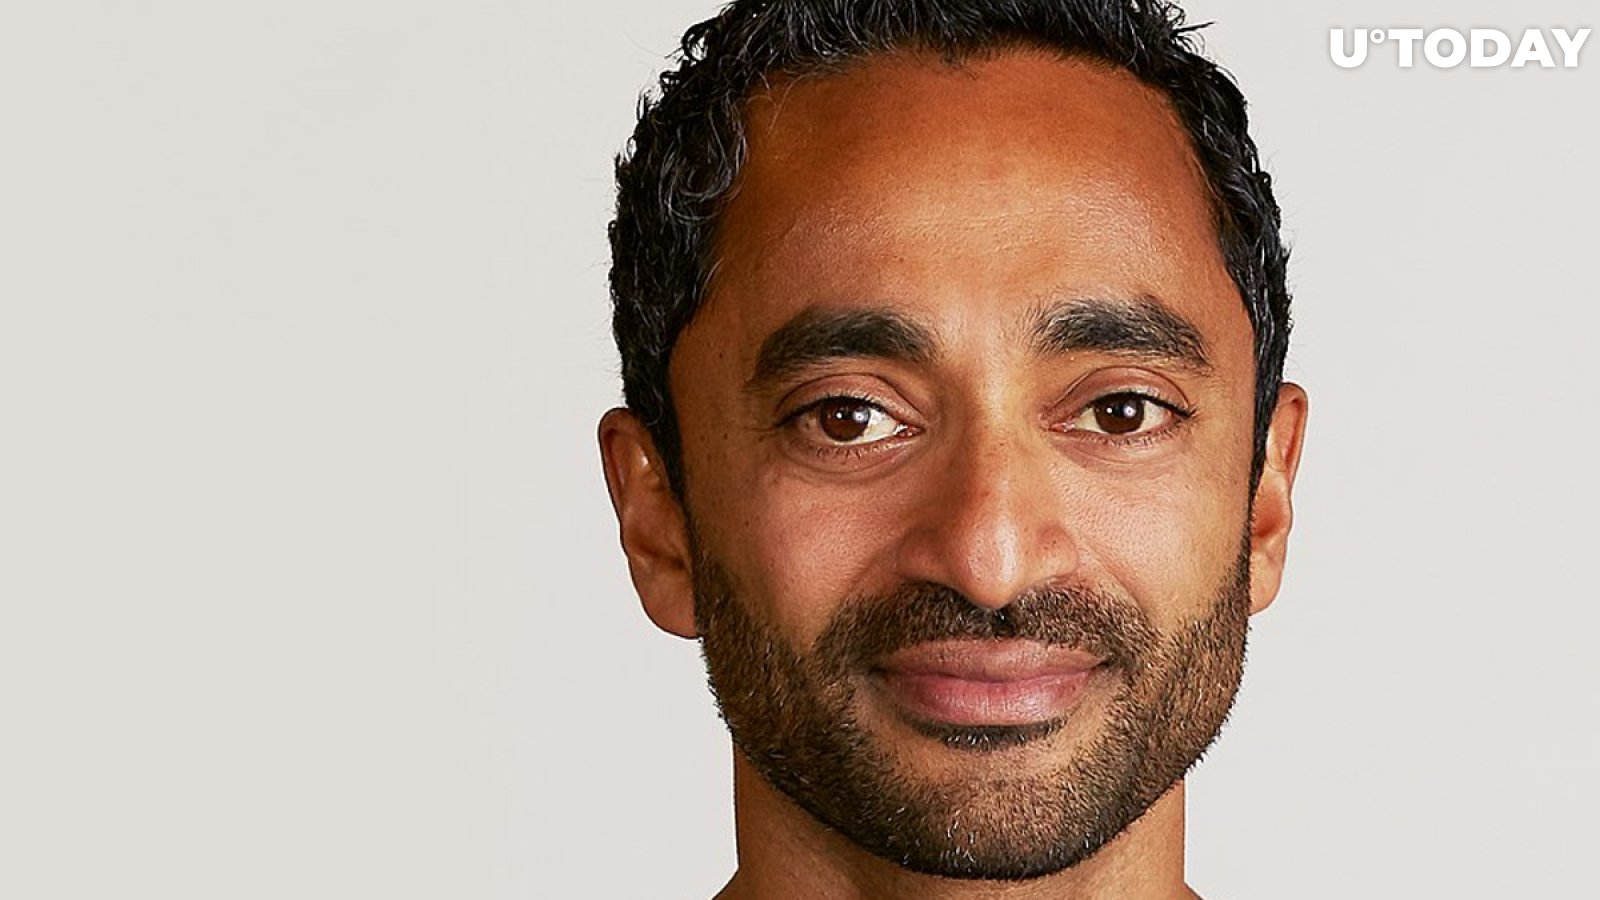 Billionaire Chamath Palihapitiya on Bitcoin: 'You're Going to Wish That You Had Just Bought One Percent and Just Kept It'